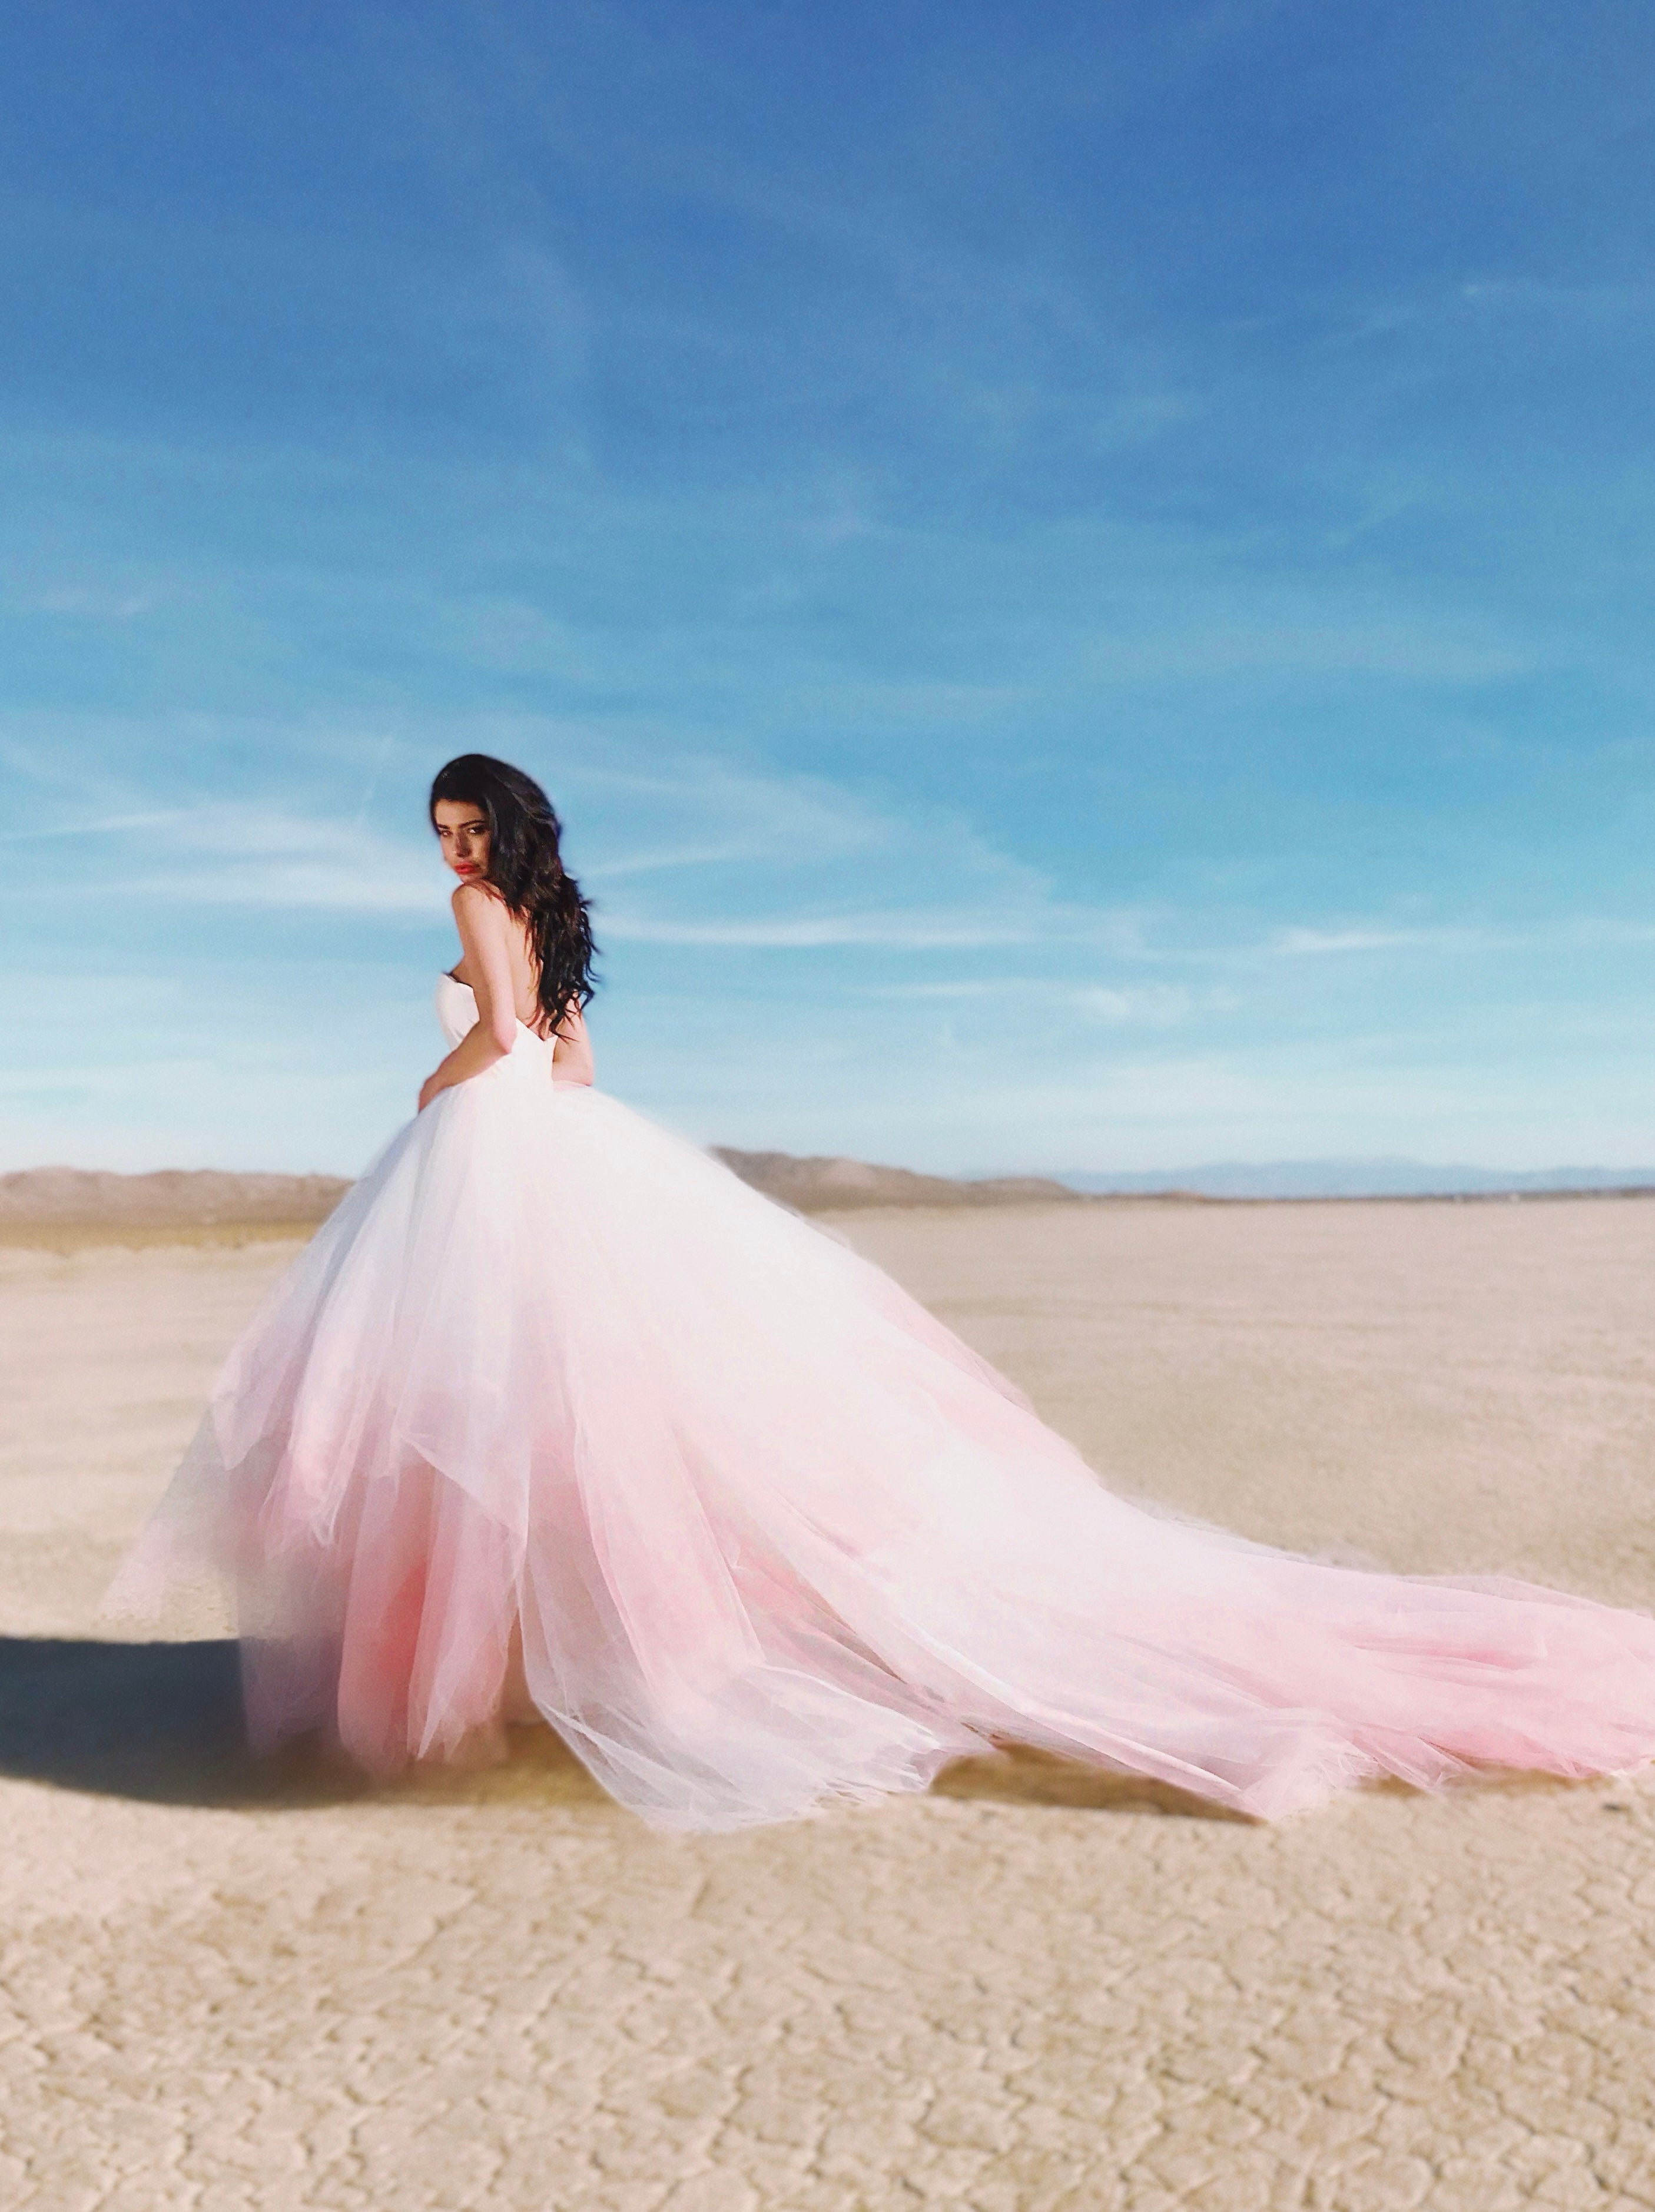 Wide shot of blush ombre wedding dress with long train trailing behind